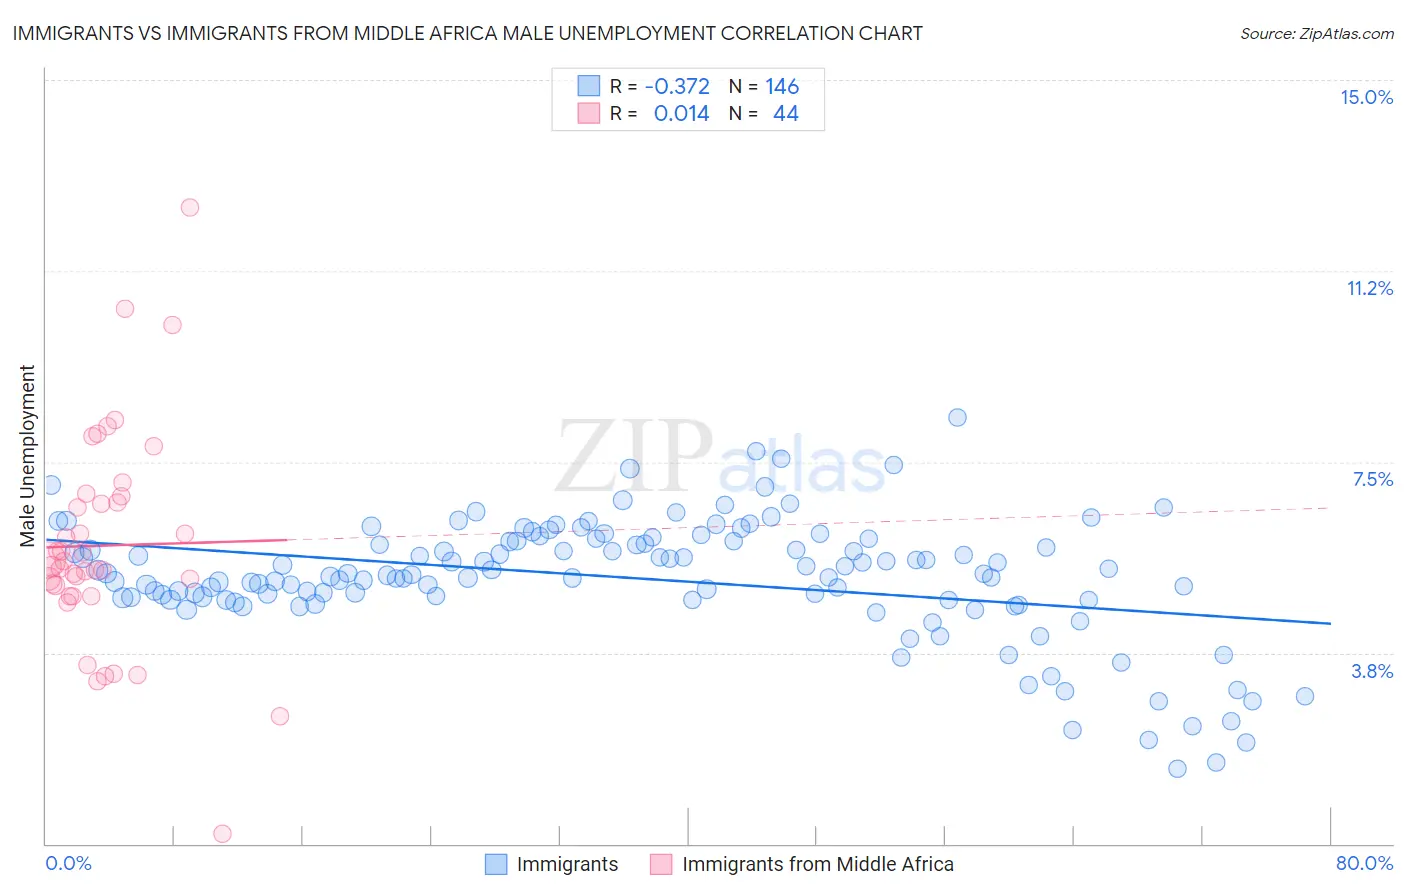 Immigrants vs Immigrants from Middle Africa Male Unemployment